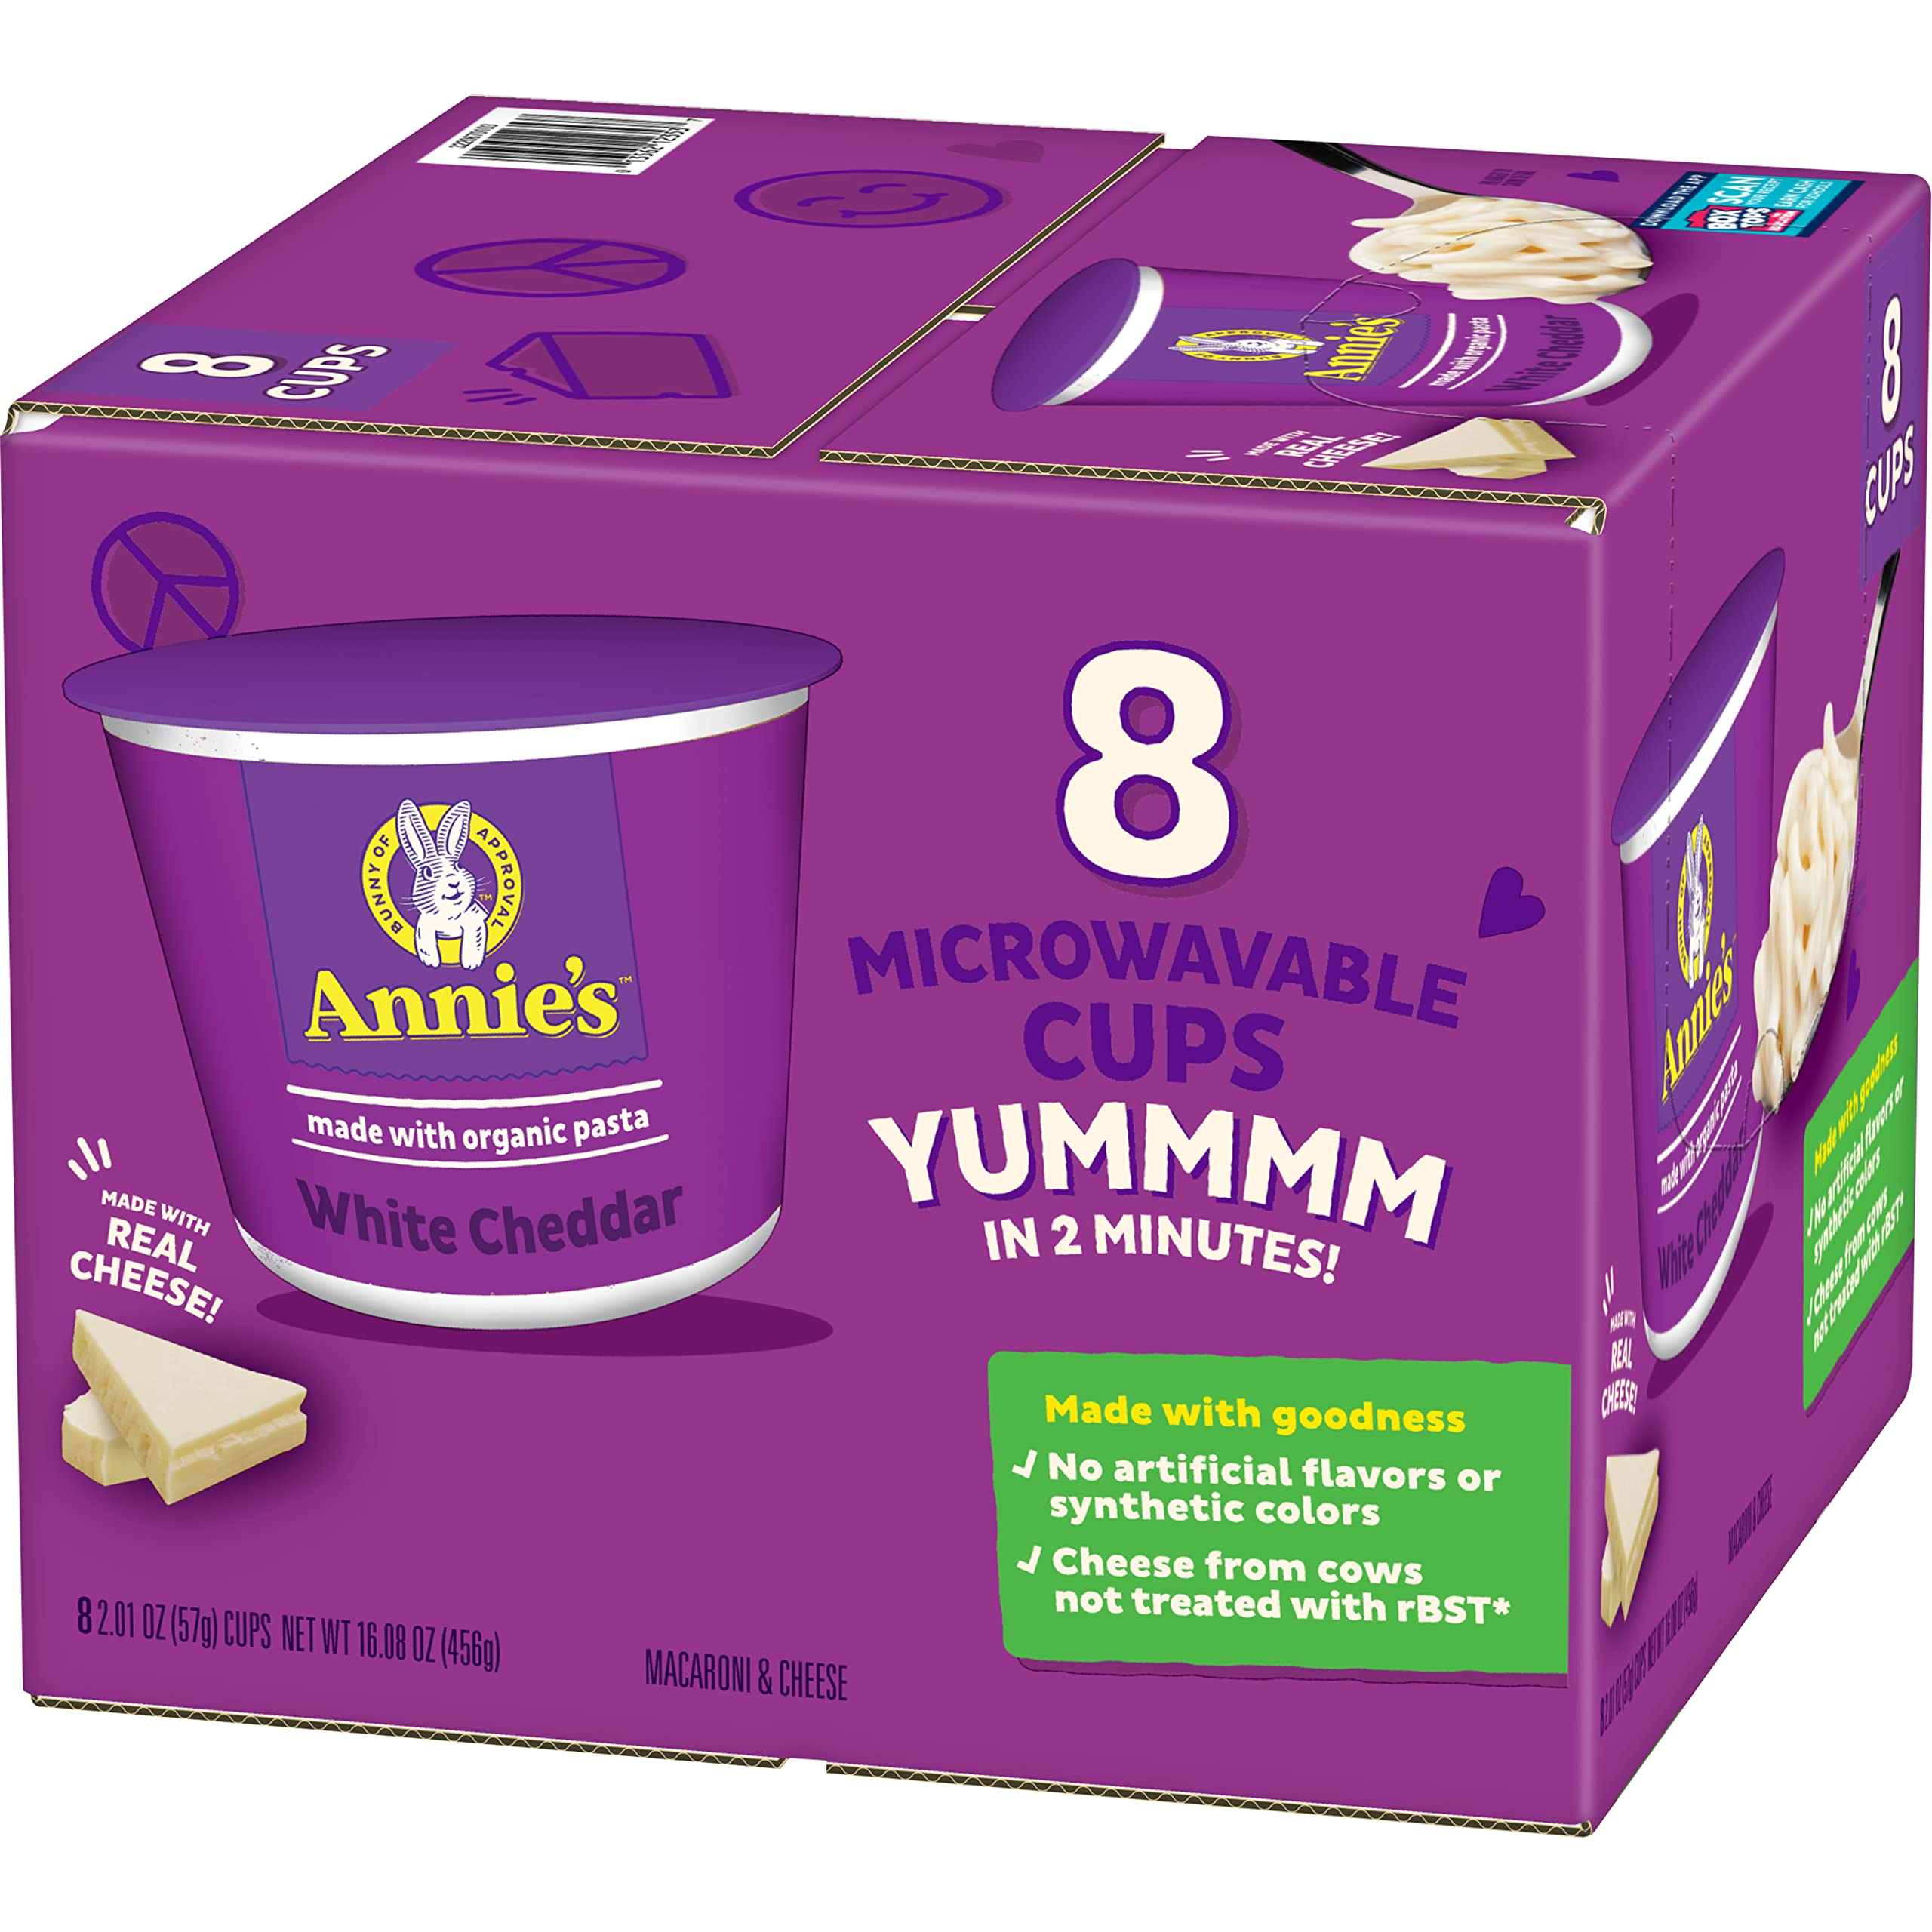 8-Count 2.01-Oz Annie's White Cheddar Mac & Cheese Cups $7.49 w/ S&S + Free Shipping w/ Prime or on orders over $25